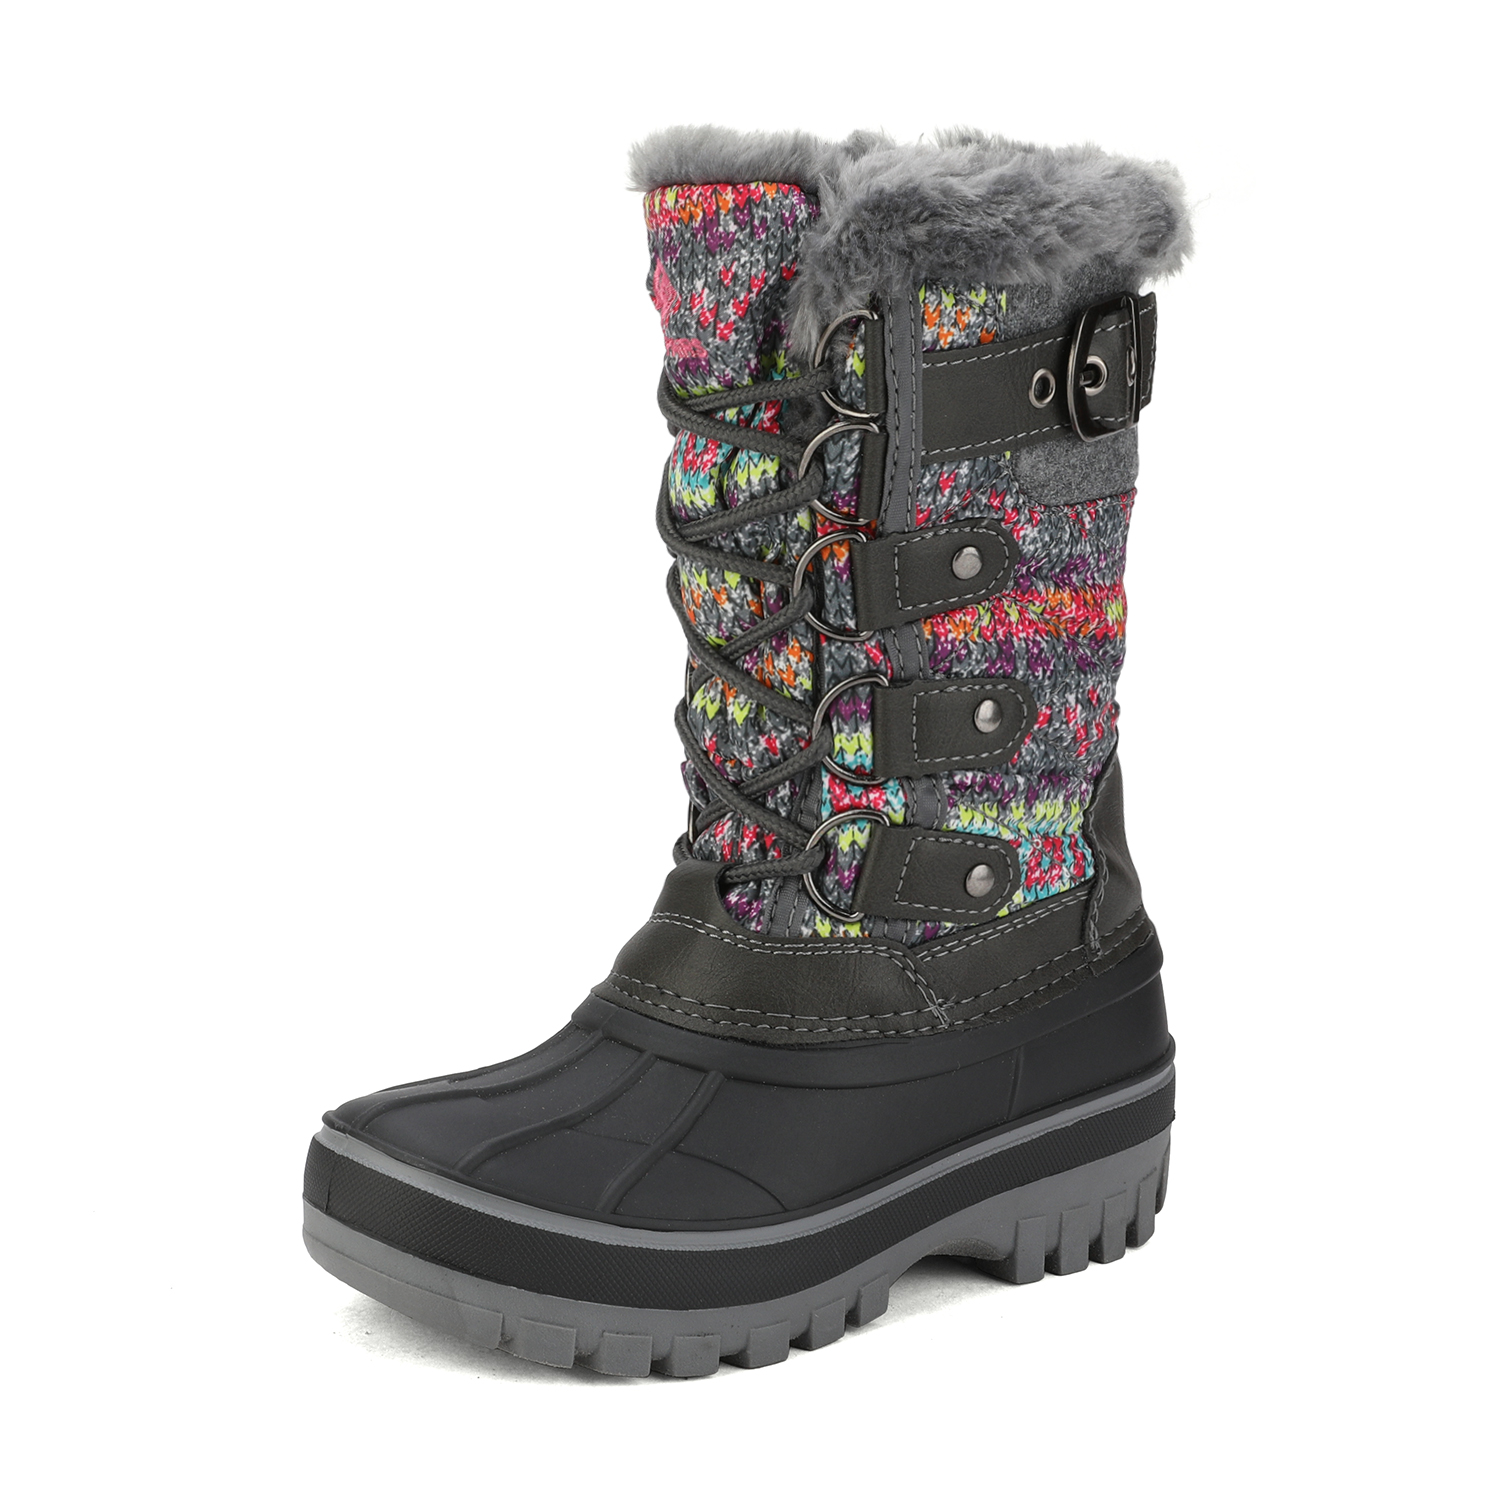 DREAM PAIRS Ankle Snow Boots Boys Girls Winter Warm Lace Up Waterproof Boots Shoes KRIVER-1 GREY/MULTI Size 6 - image 1 of 3